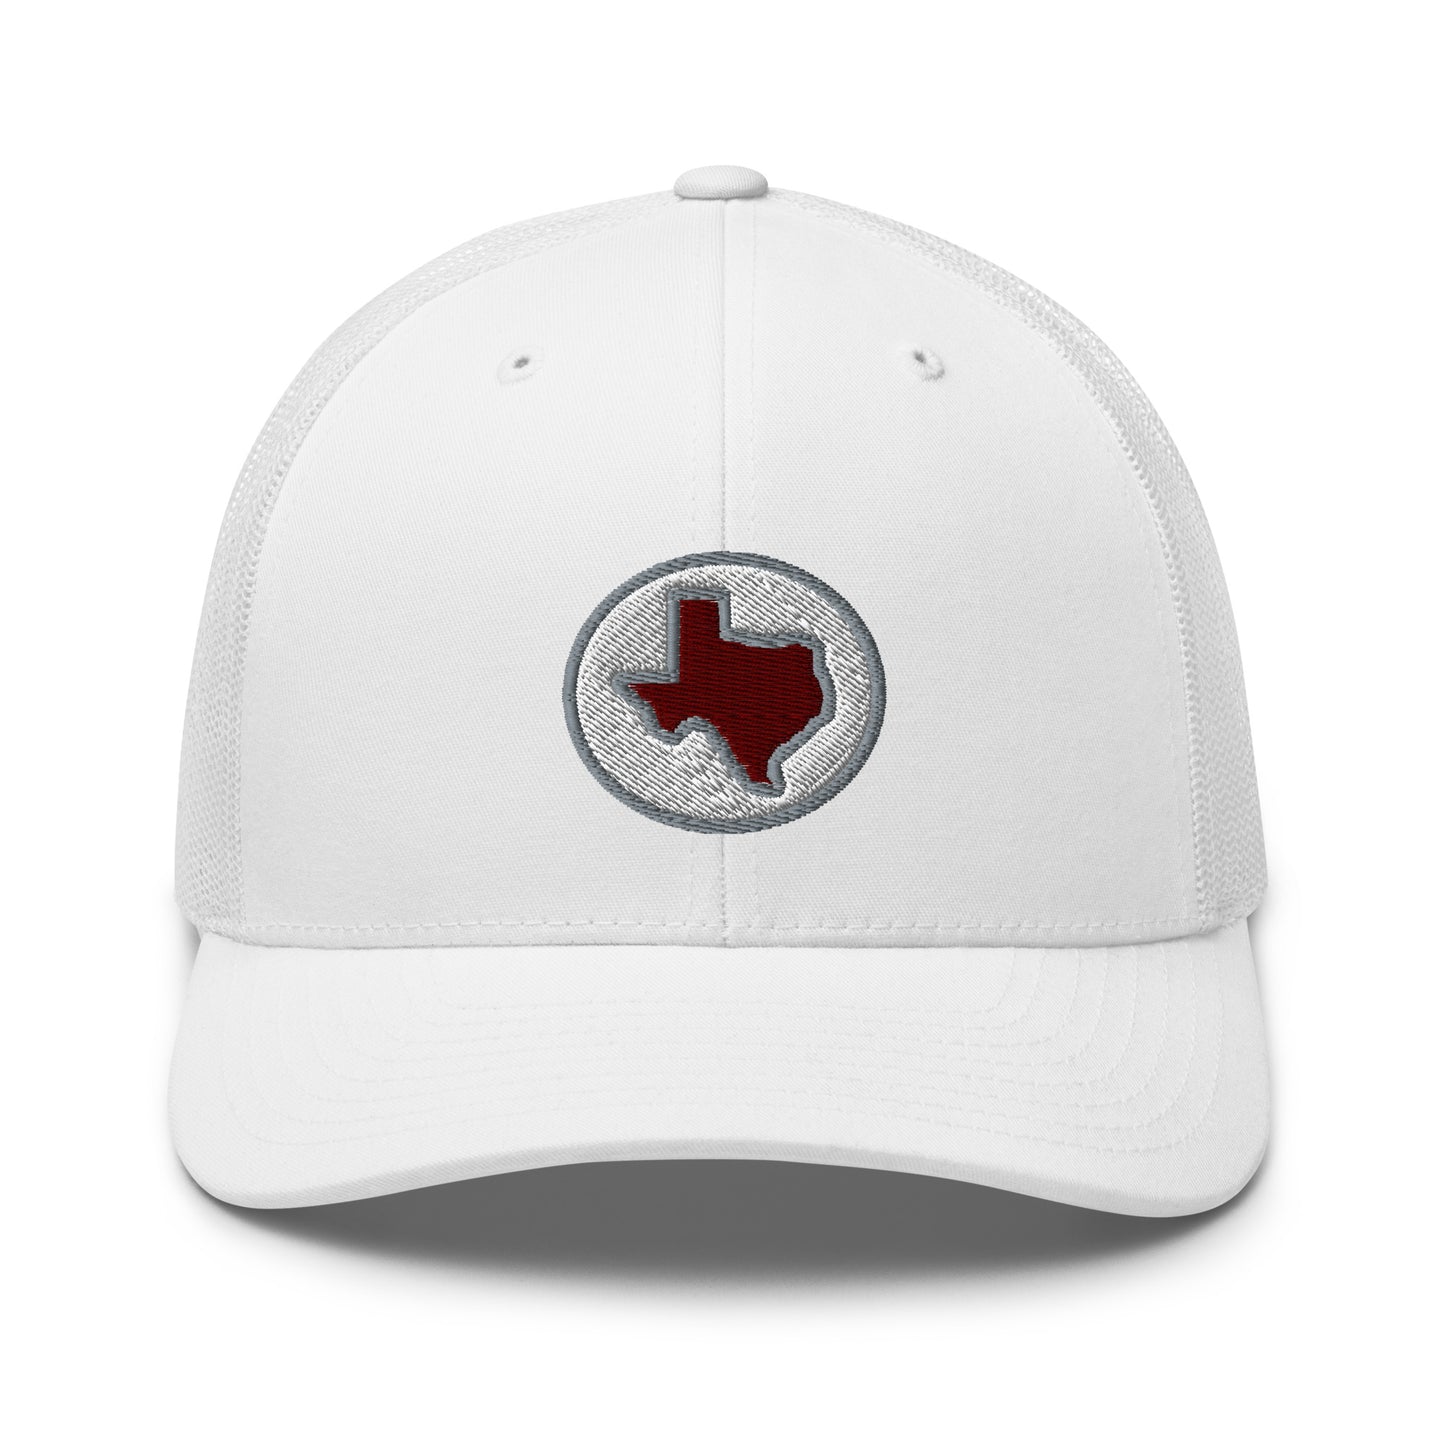 The College Station Texas Trucker Cap